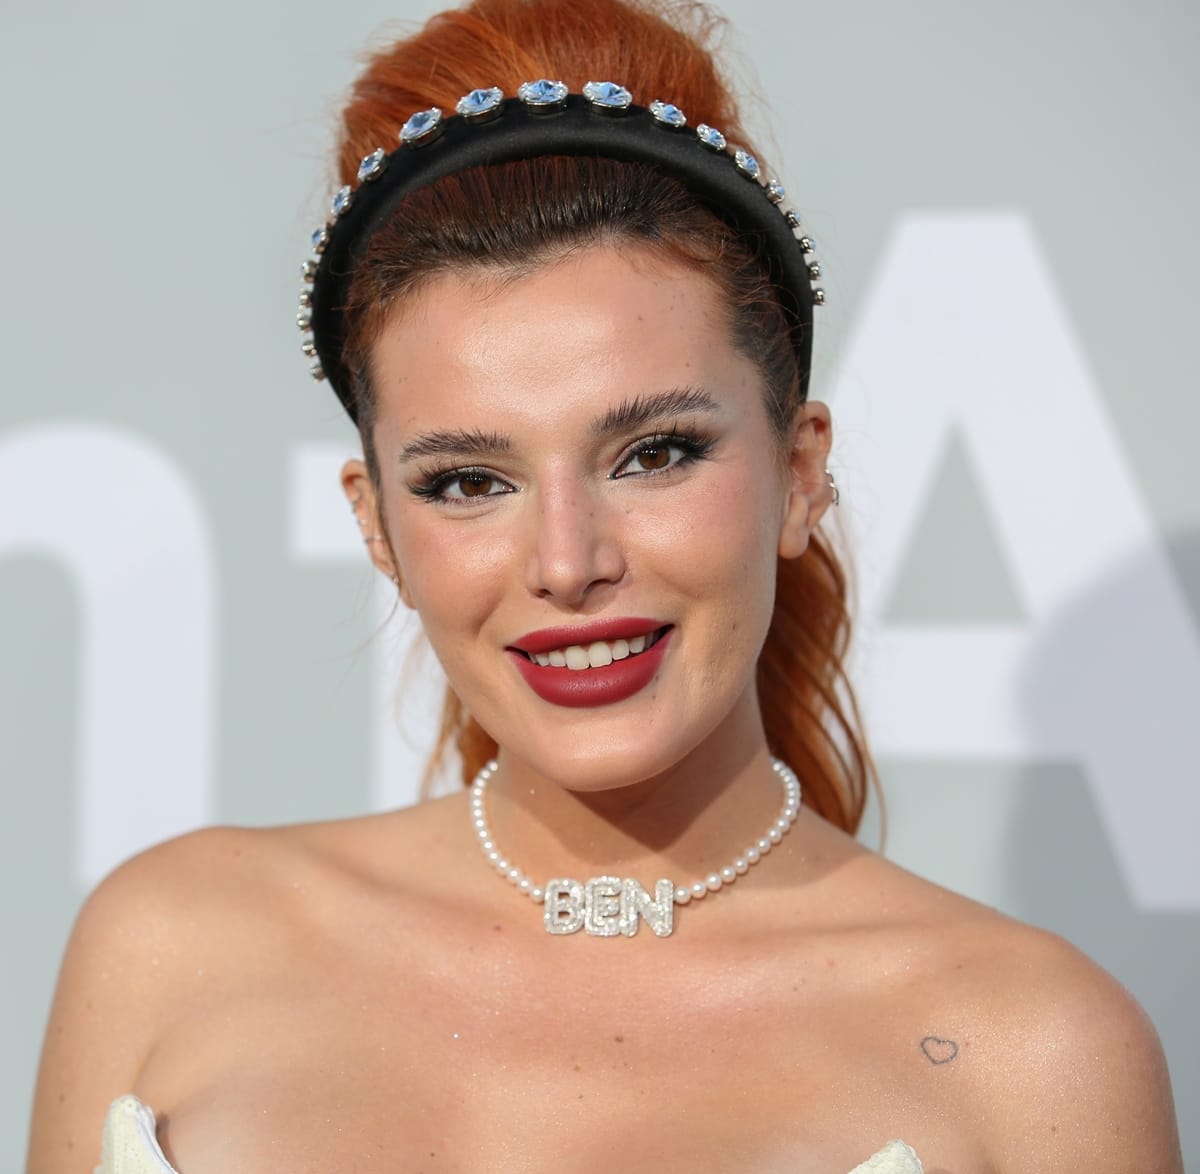 Bella Thorne's crystal-studded headband and pearl necklace with crystal ‘Ben’ lettering